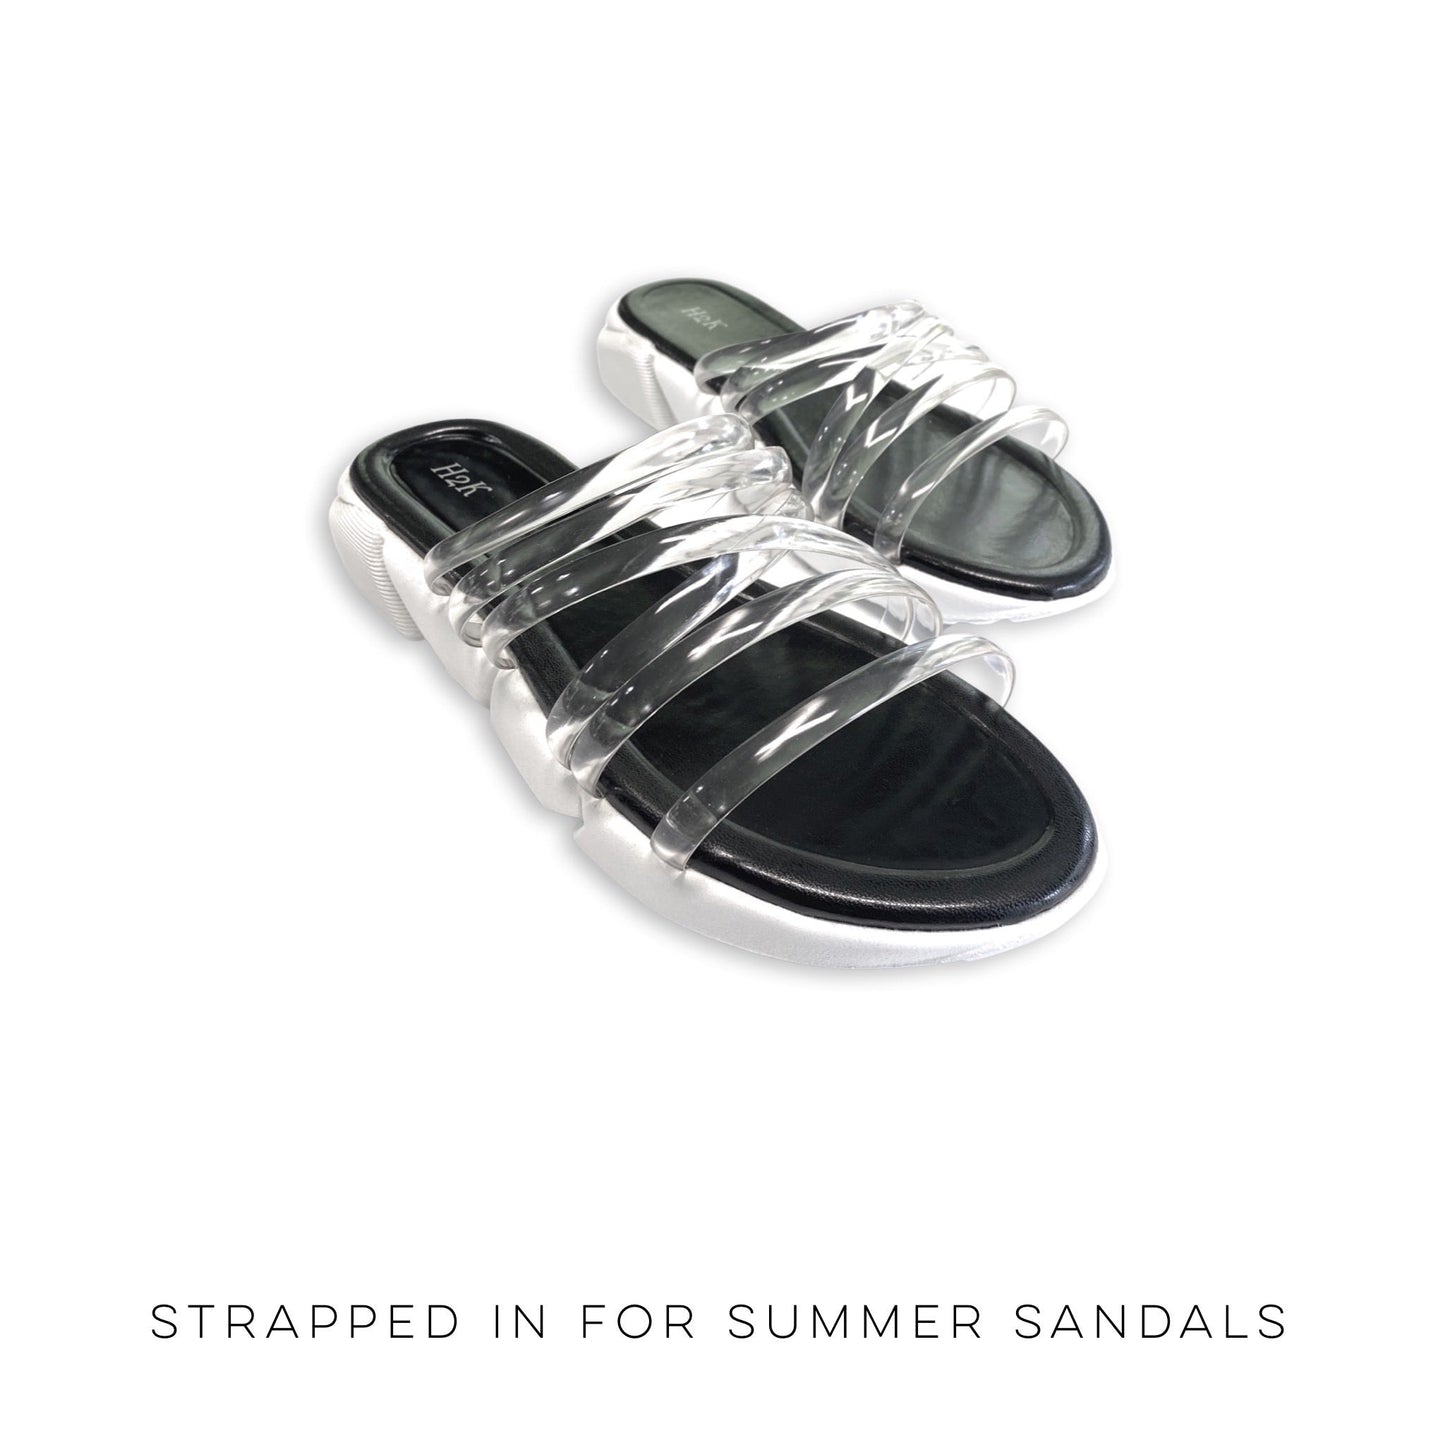 Strapped in for Summer Sandals